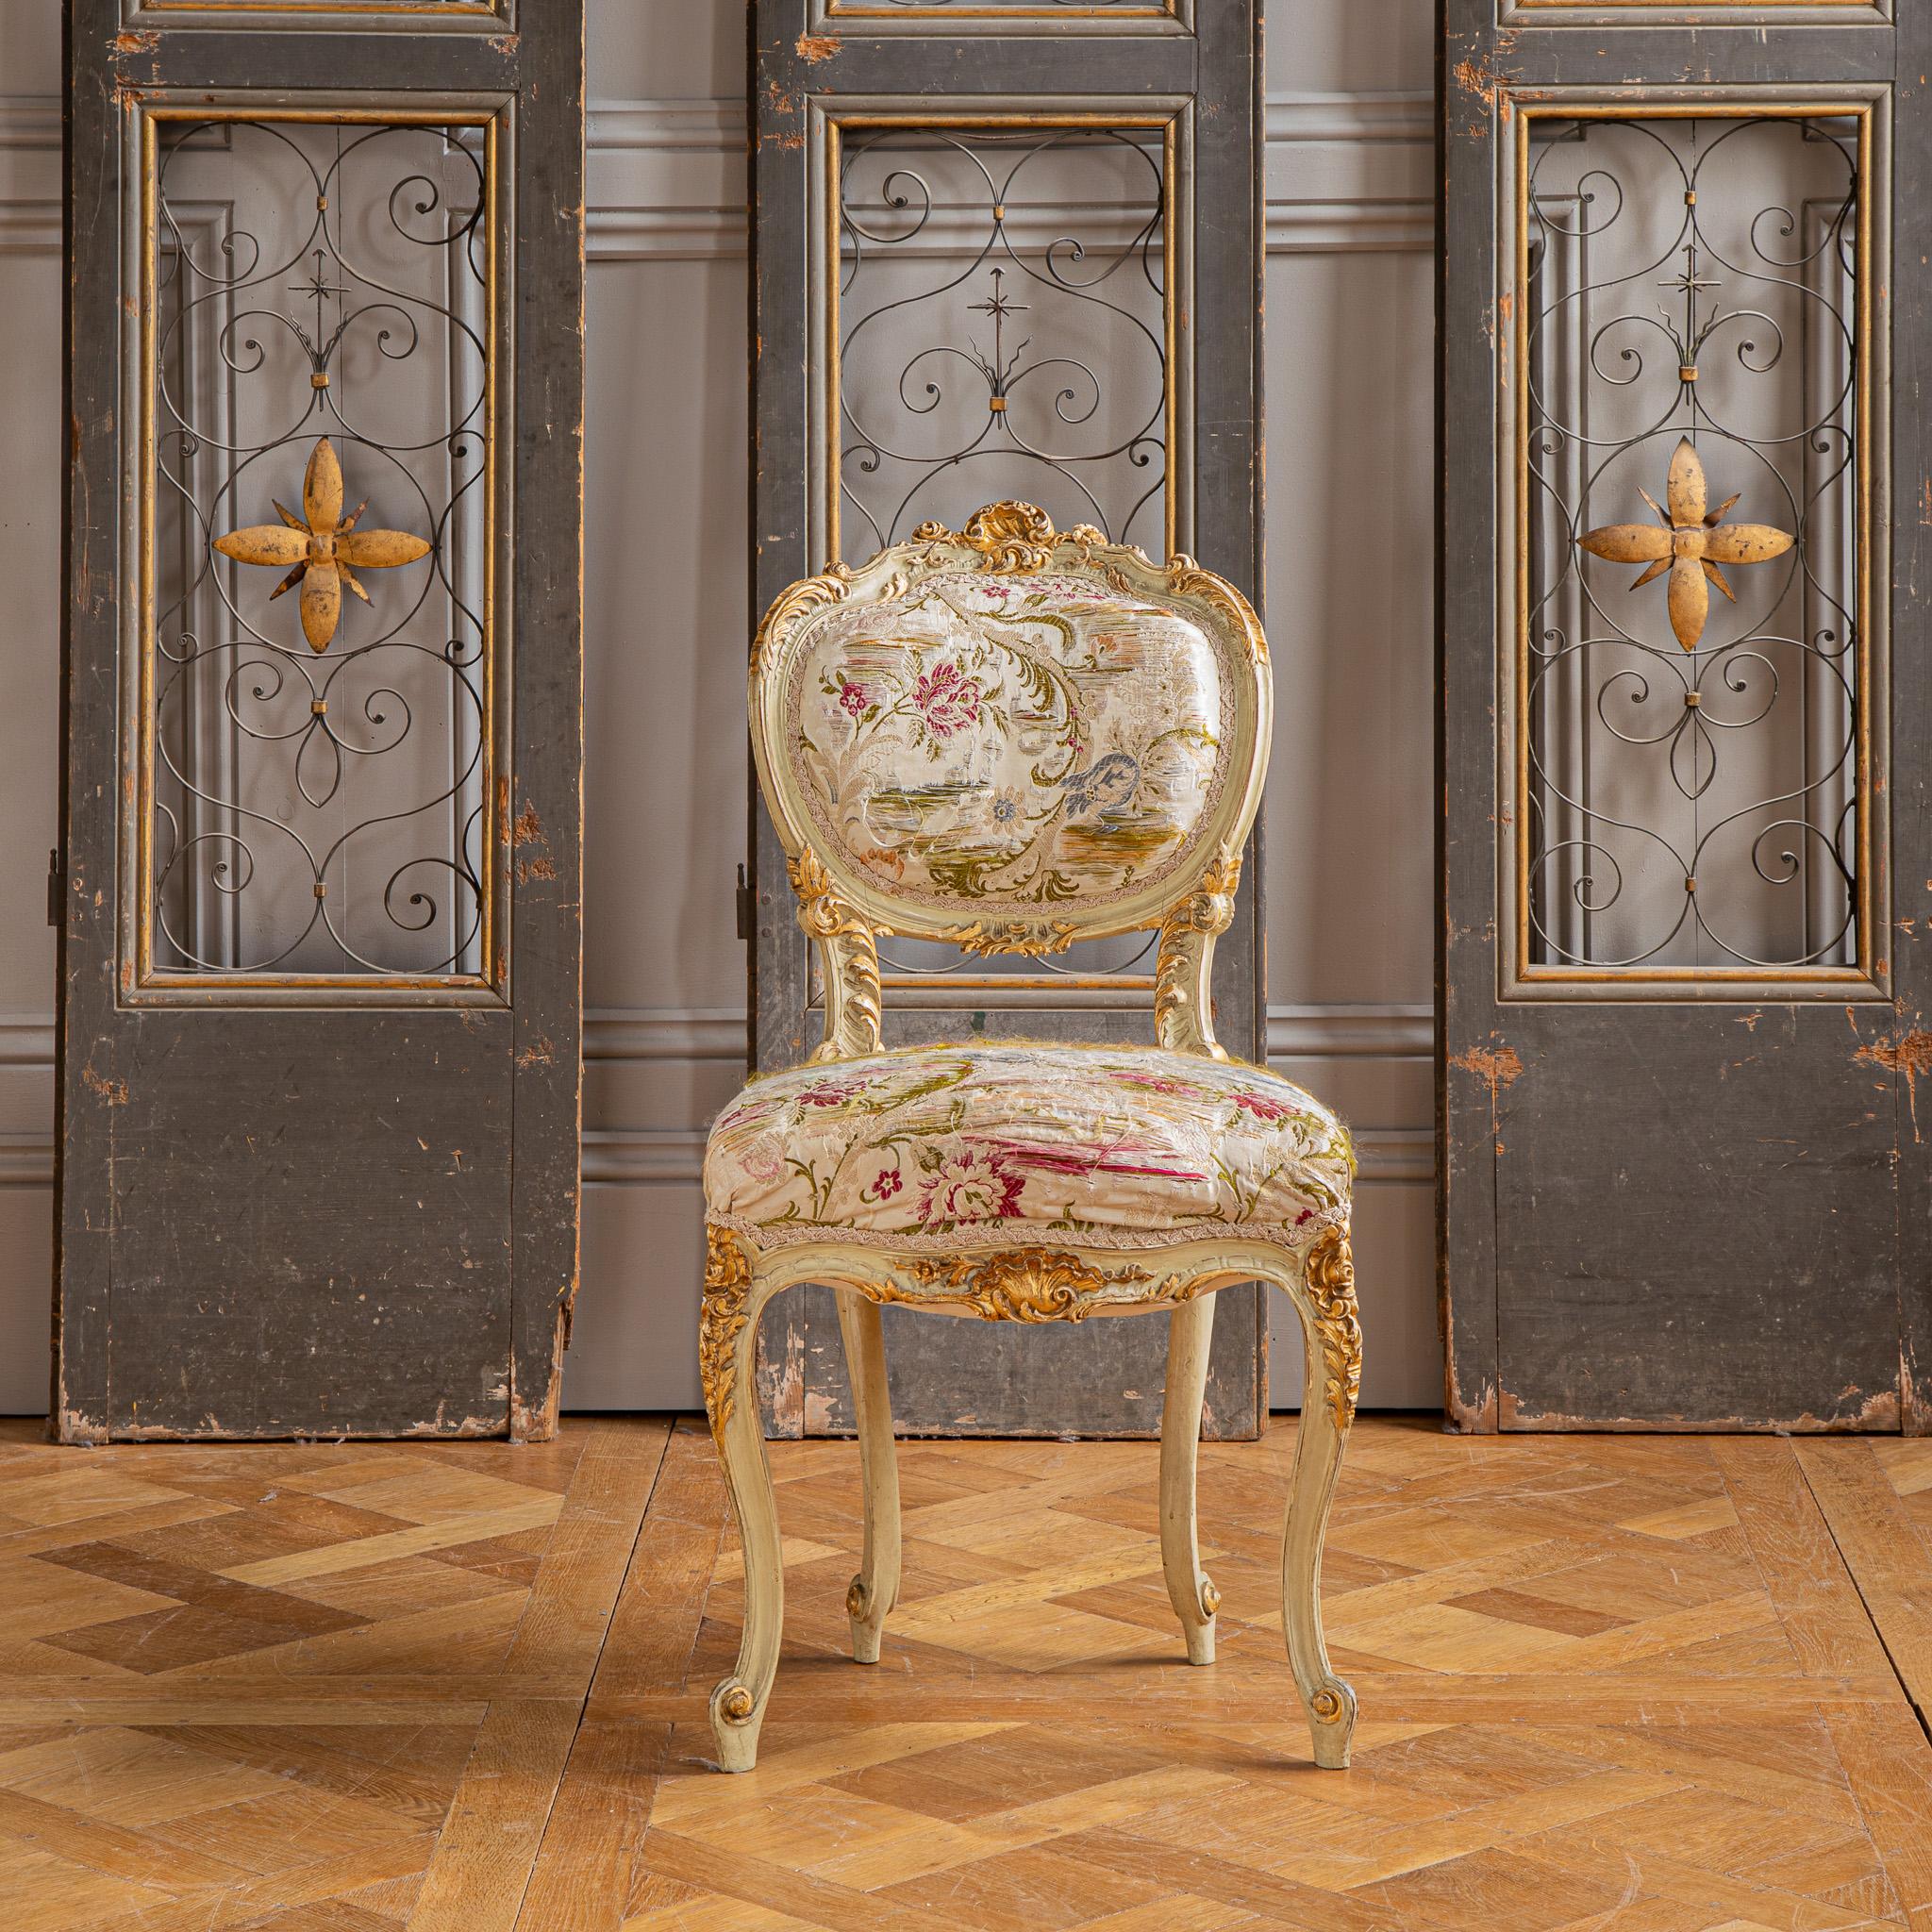 19th Century Italian Carved Gilt-wood Salon Suite - Sofa, Chairs & Footstools  For Sale 2